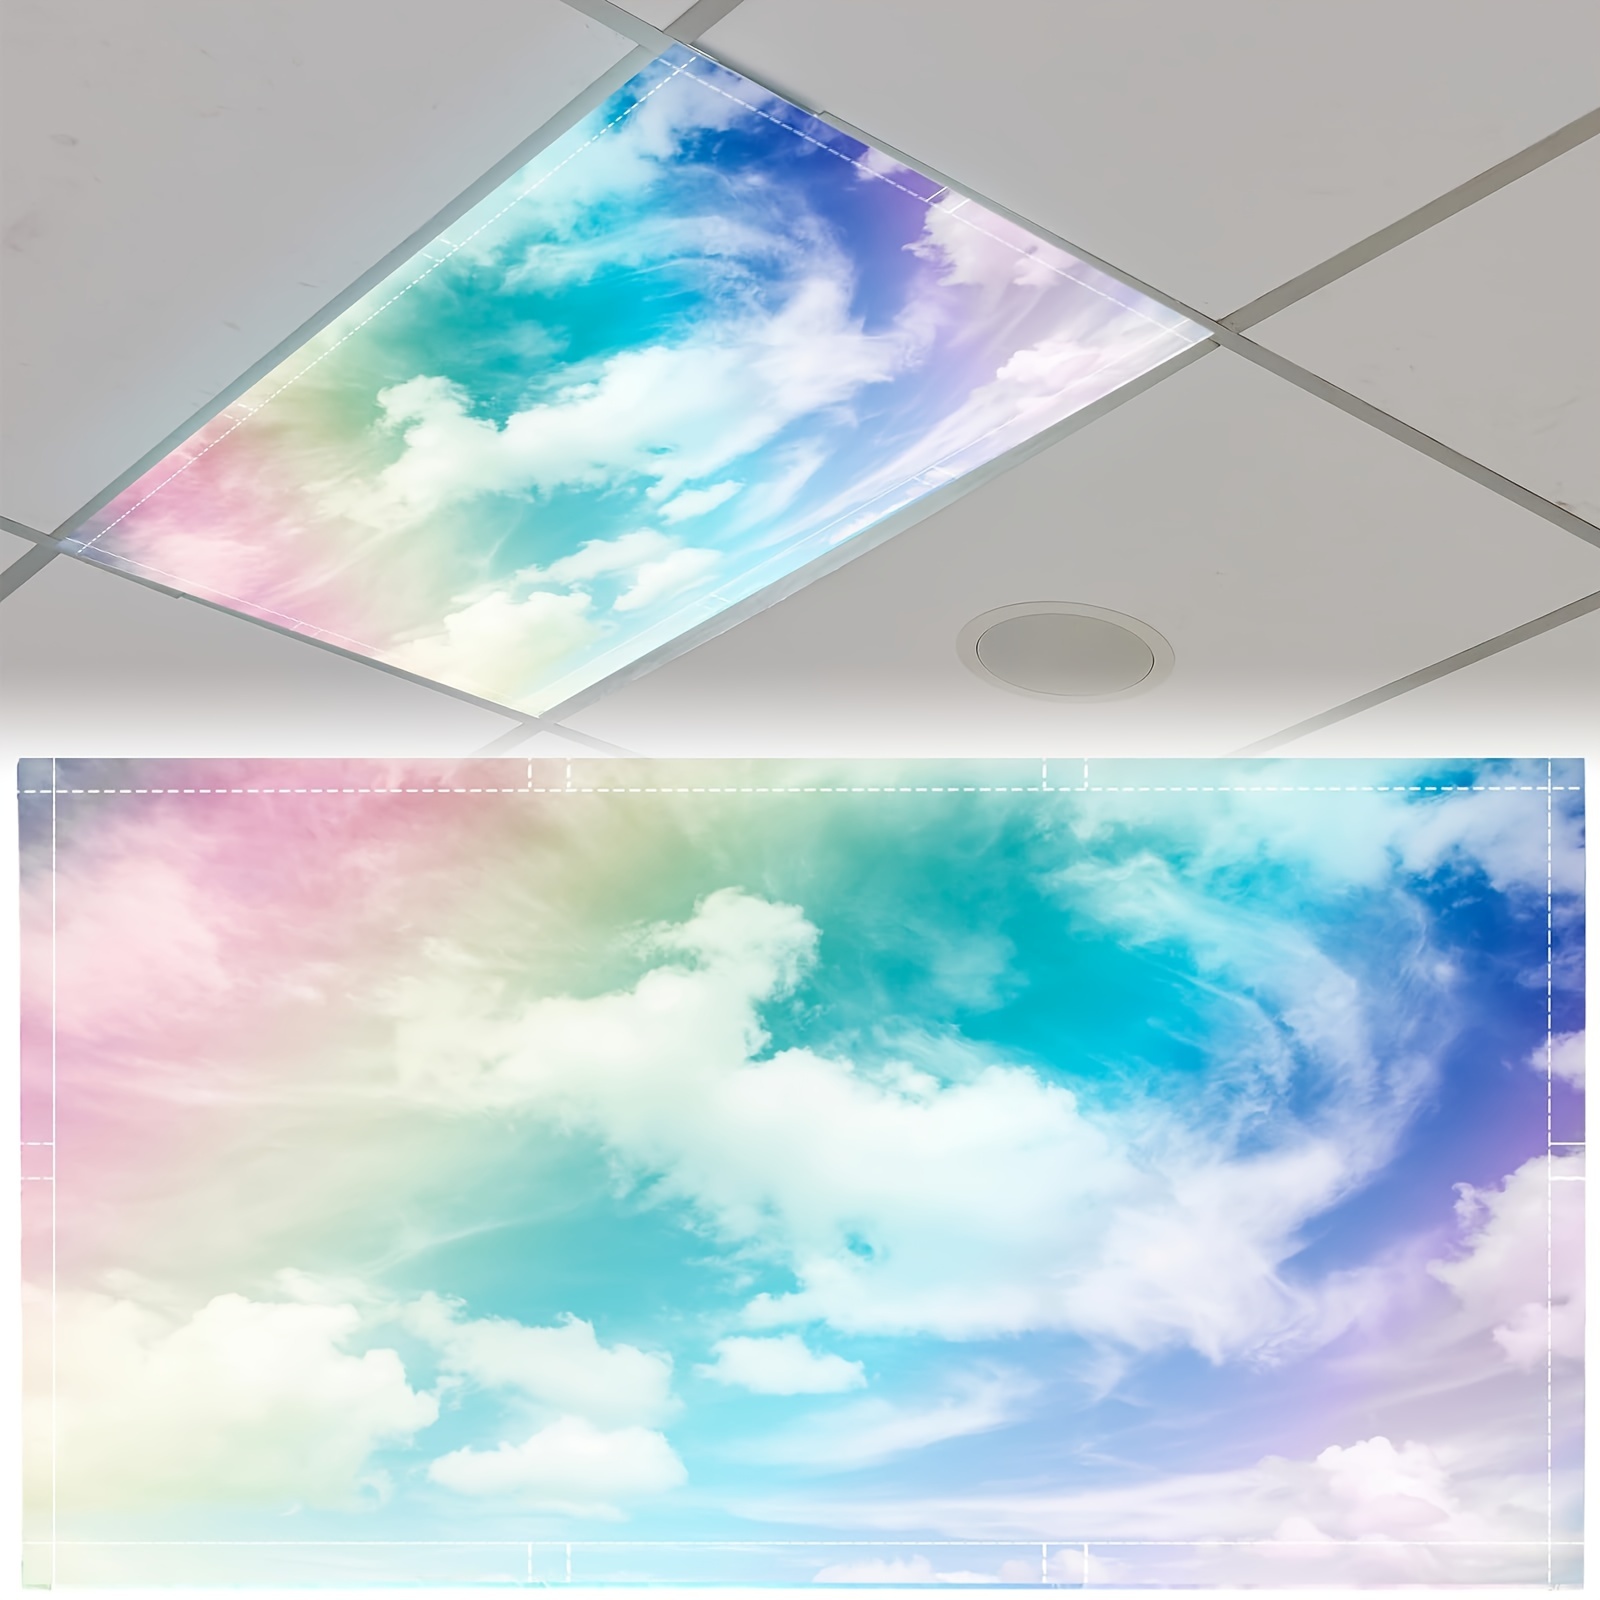 

Colorful Clouds Magnetic Fluorescent Light Cover - 4x2ft Ceiling Lamp Shade For Office, Classroom & Home Decor, Easy Install, No Wiring Needed